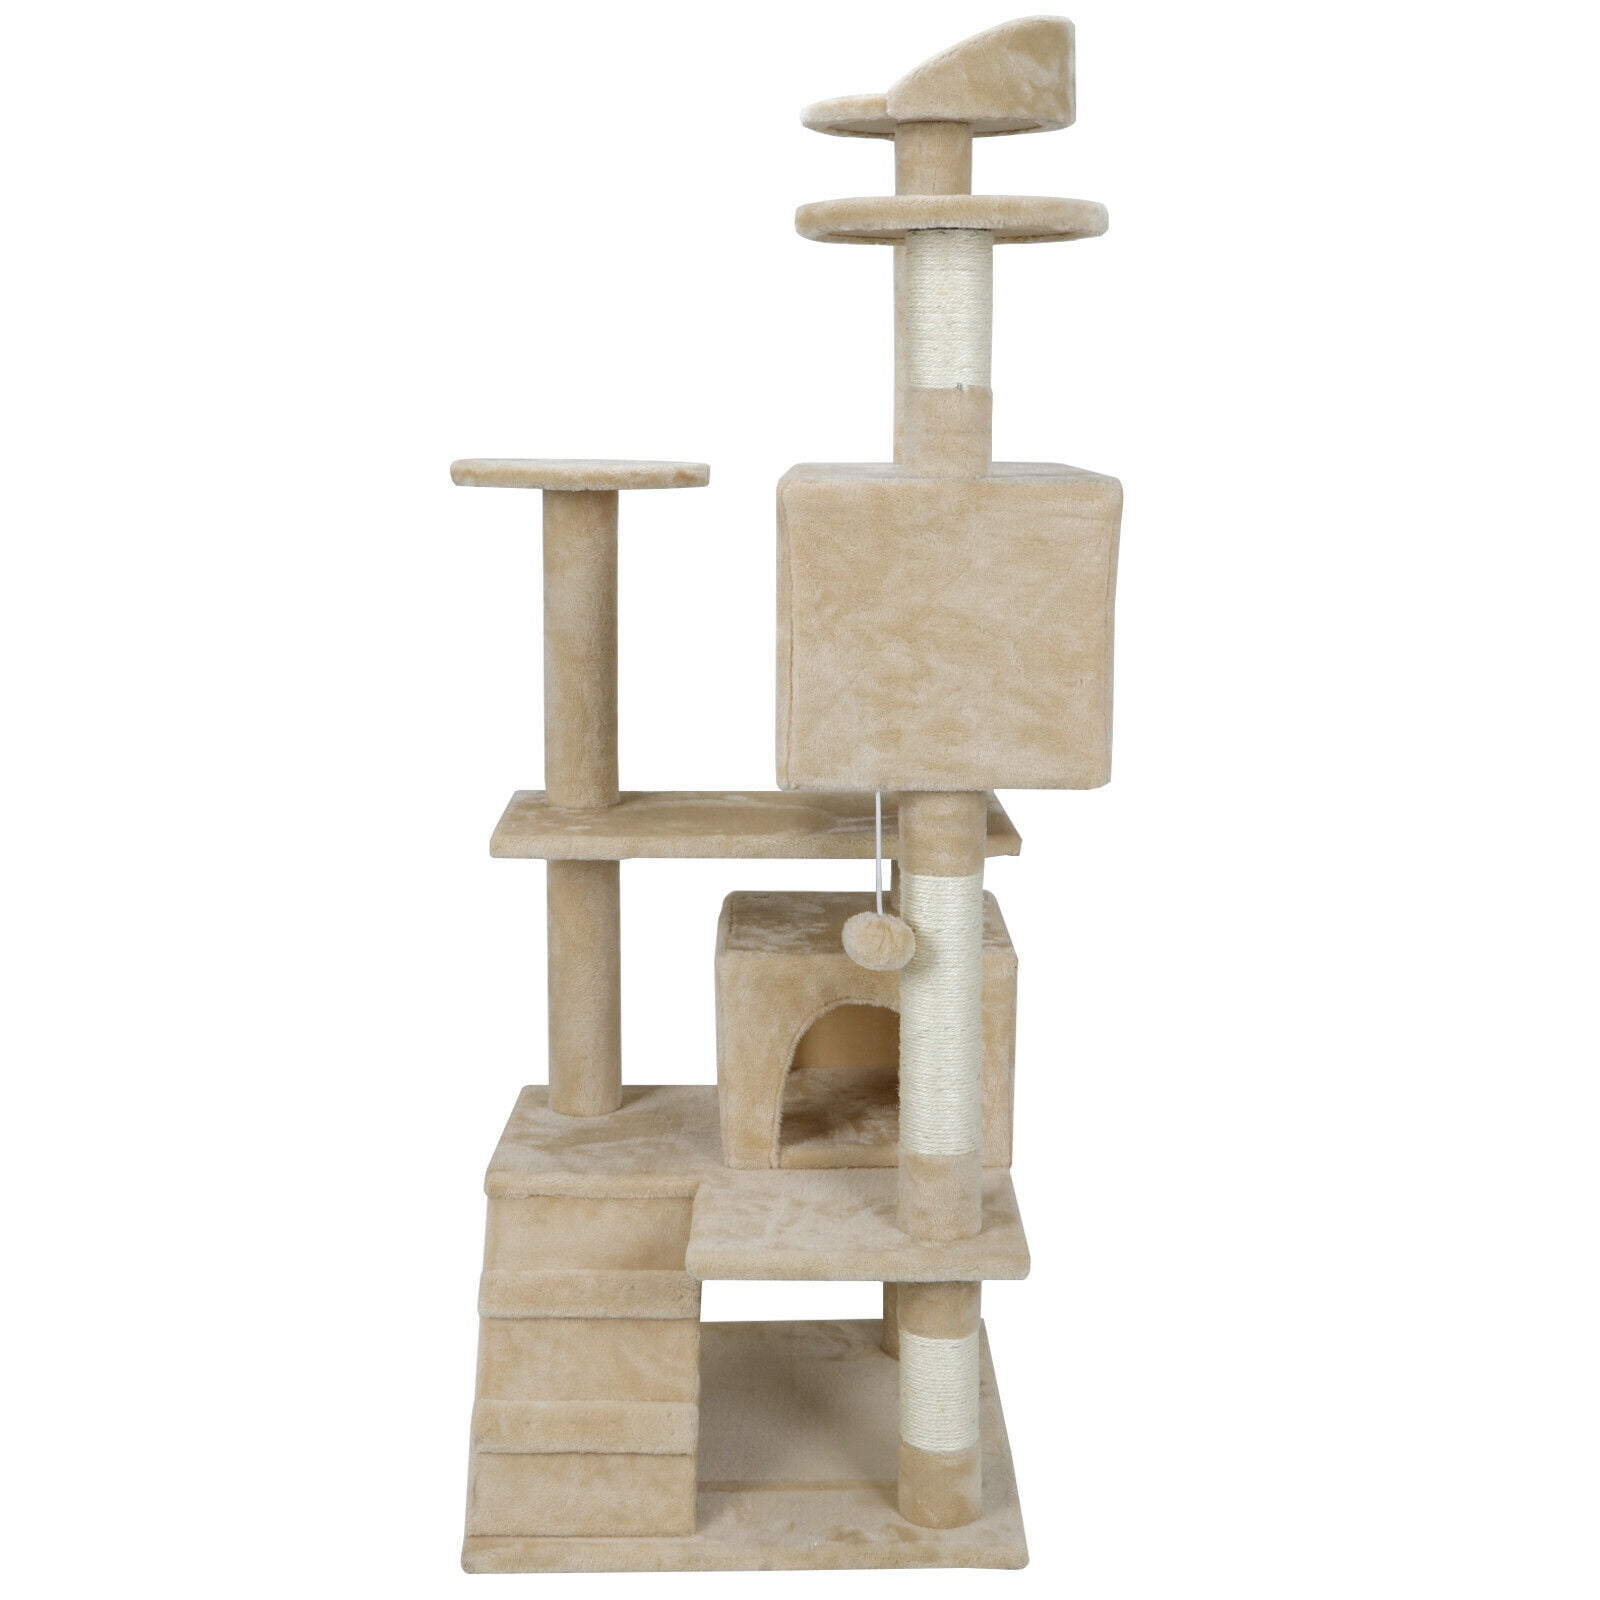 ZENSTYLE 53" Cat Tree Scratching Post Condo Tower Pet Kitty Playhouse Activity W/ Cave & Ladders Indoor Have Fun - Beige